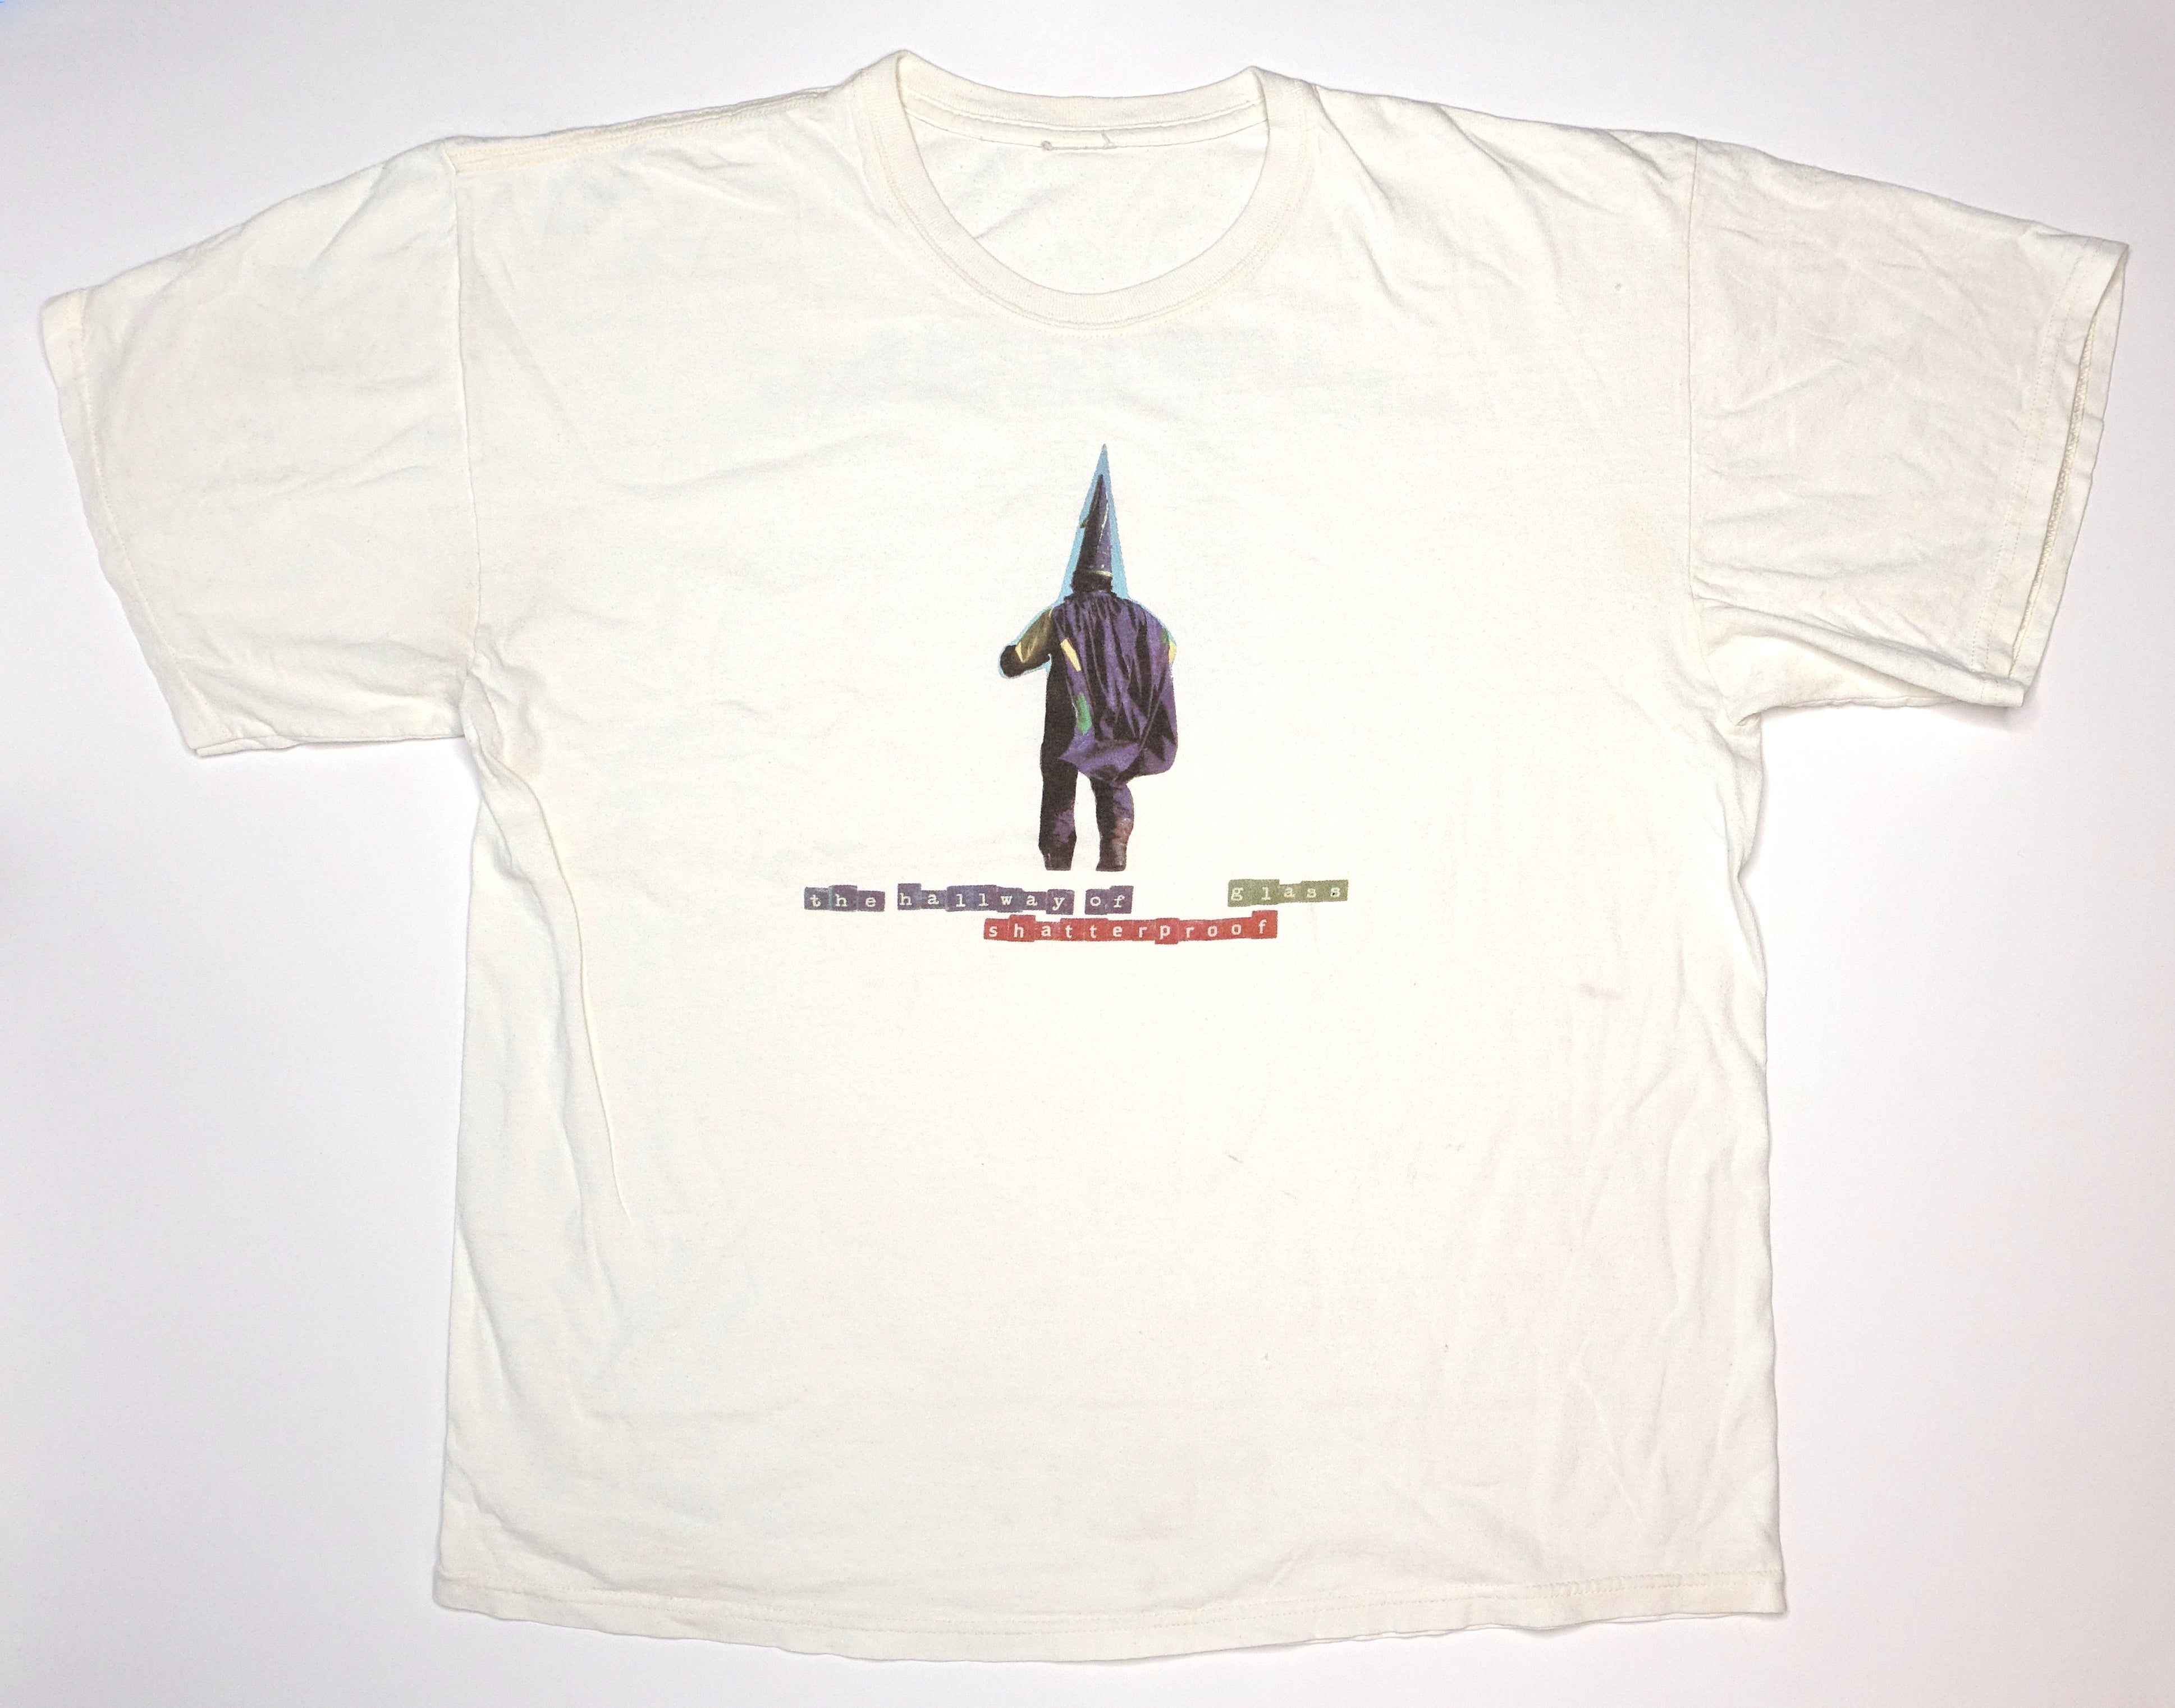 Guided By Voices ‎– Hallway Of Shatterproof Glass 2010 Tour Shirt Size XL